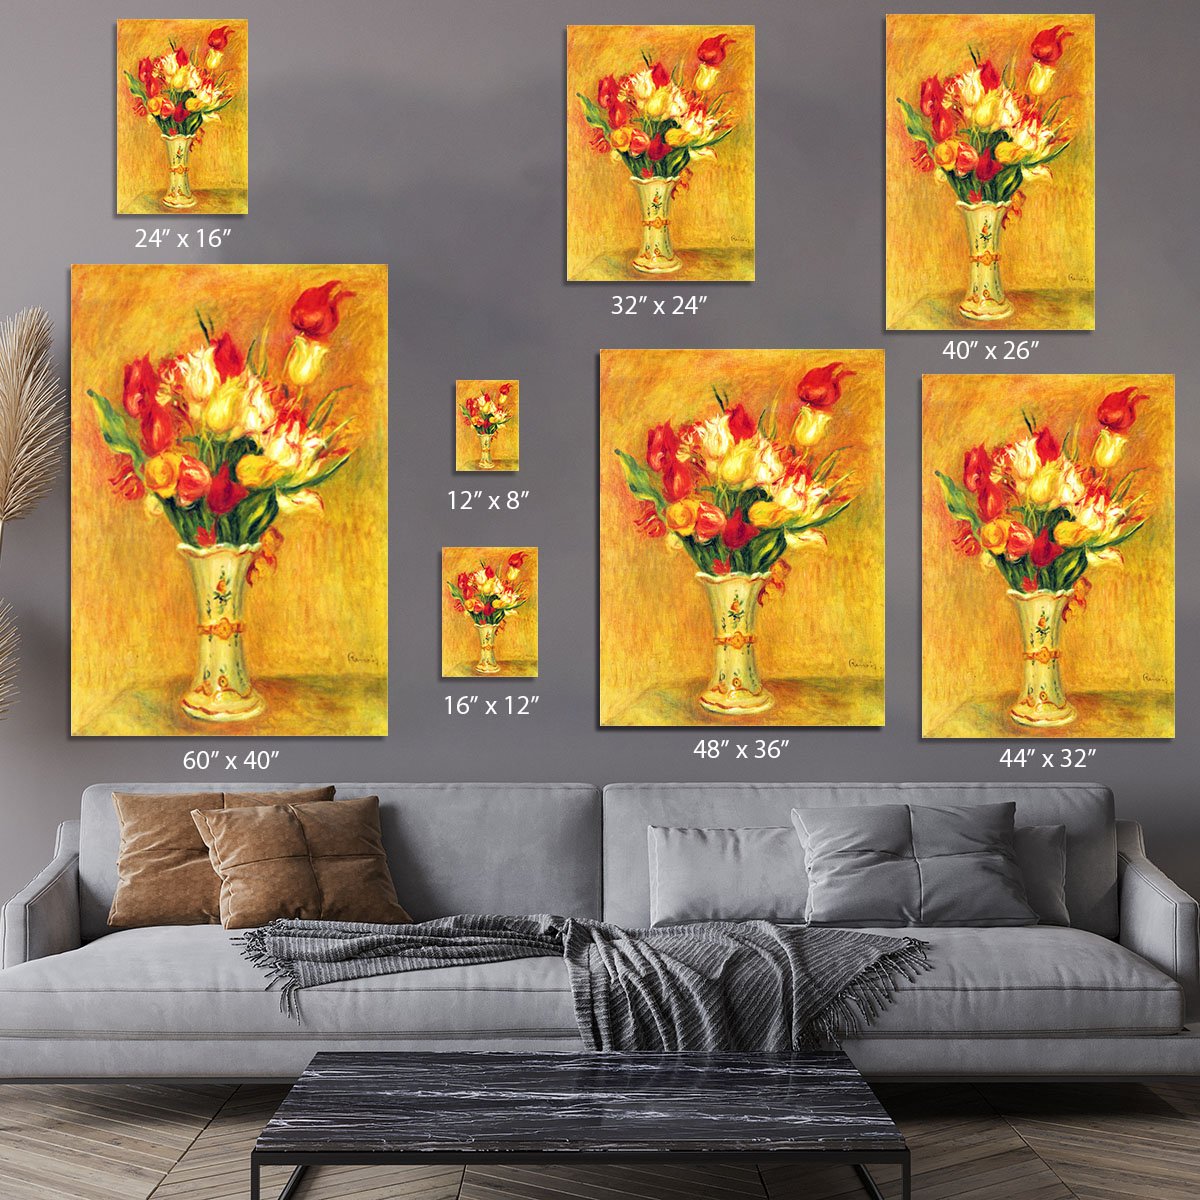 Tulips in a Vase by Renoir Canvas Print or Poster